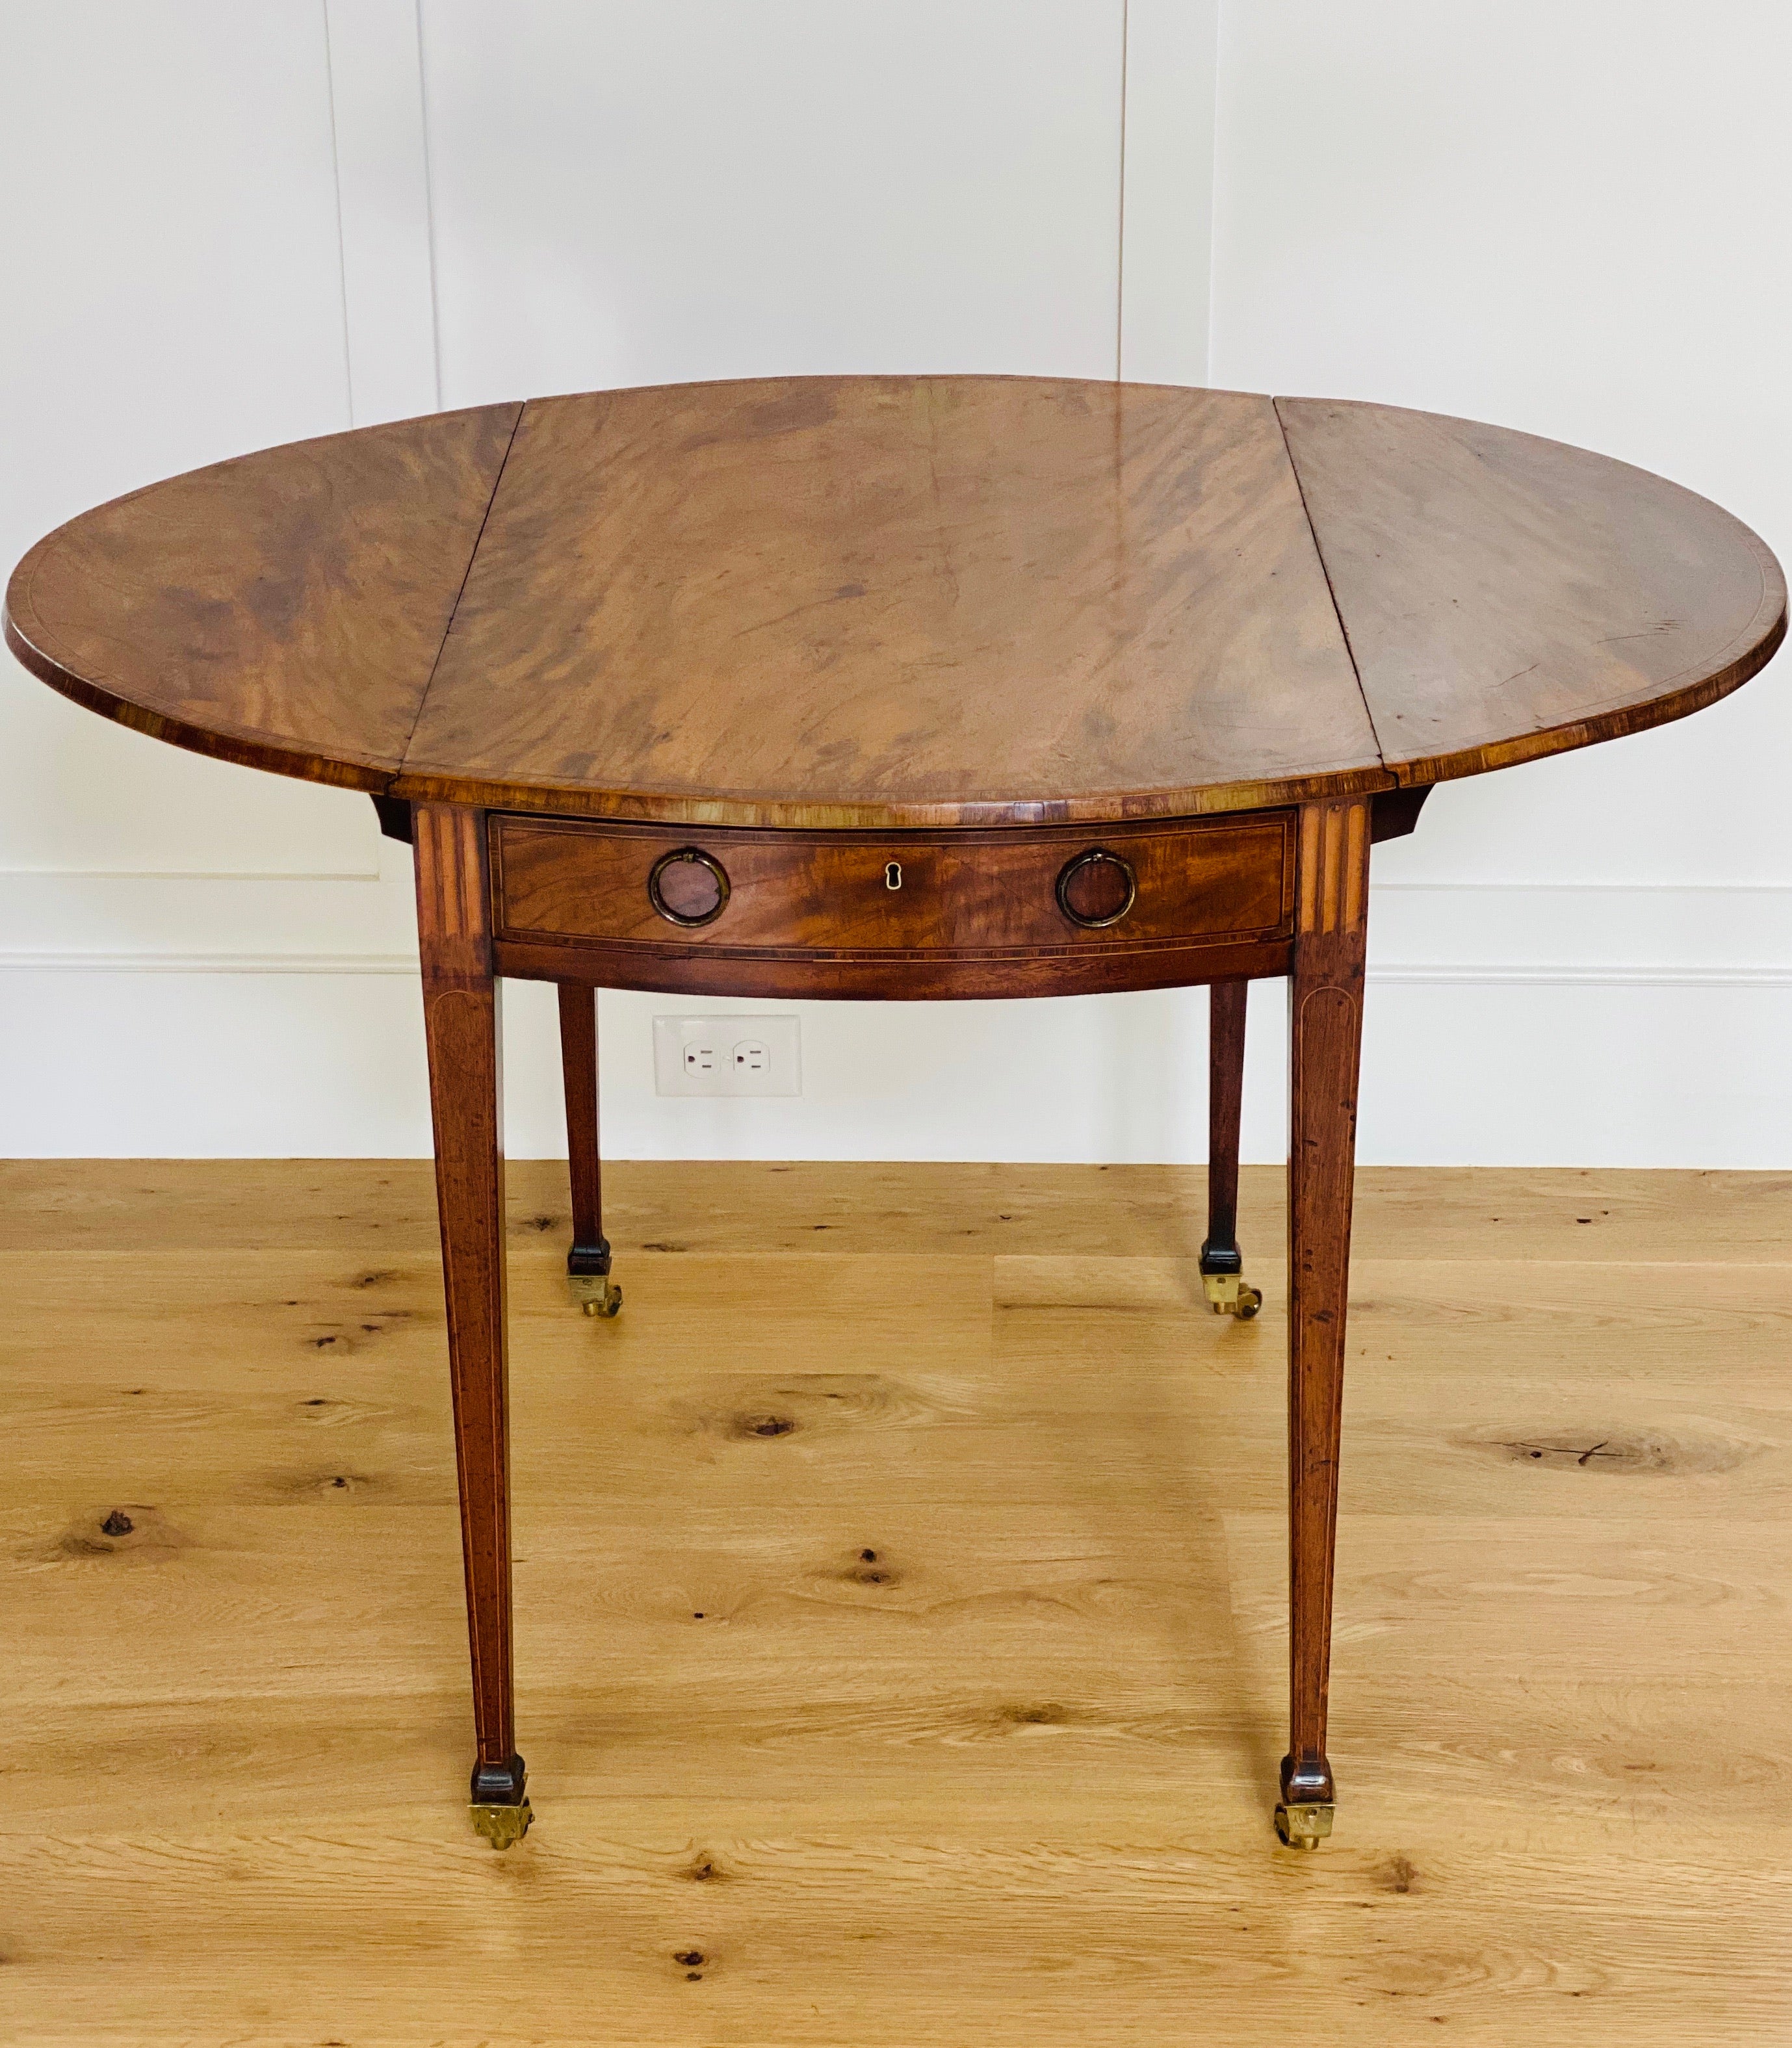 Antique George III Inlaid Pembroke Table from the Estate of Mario Buatta